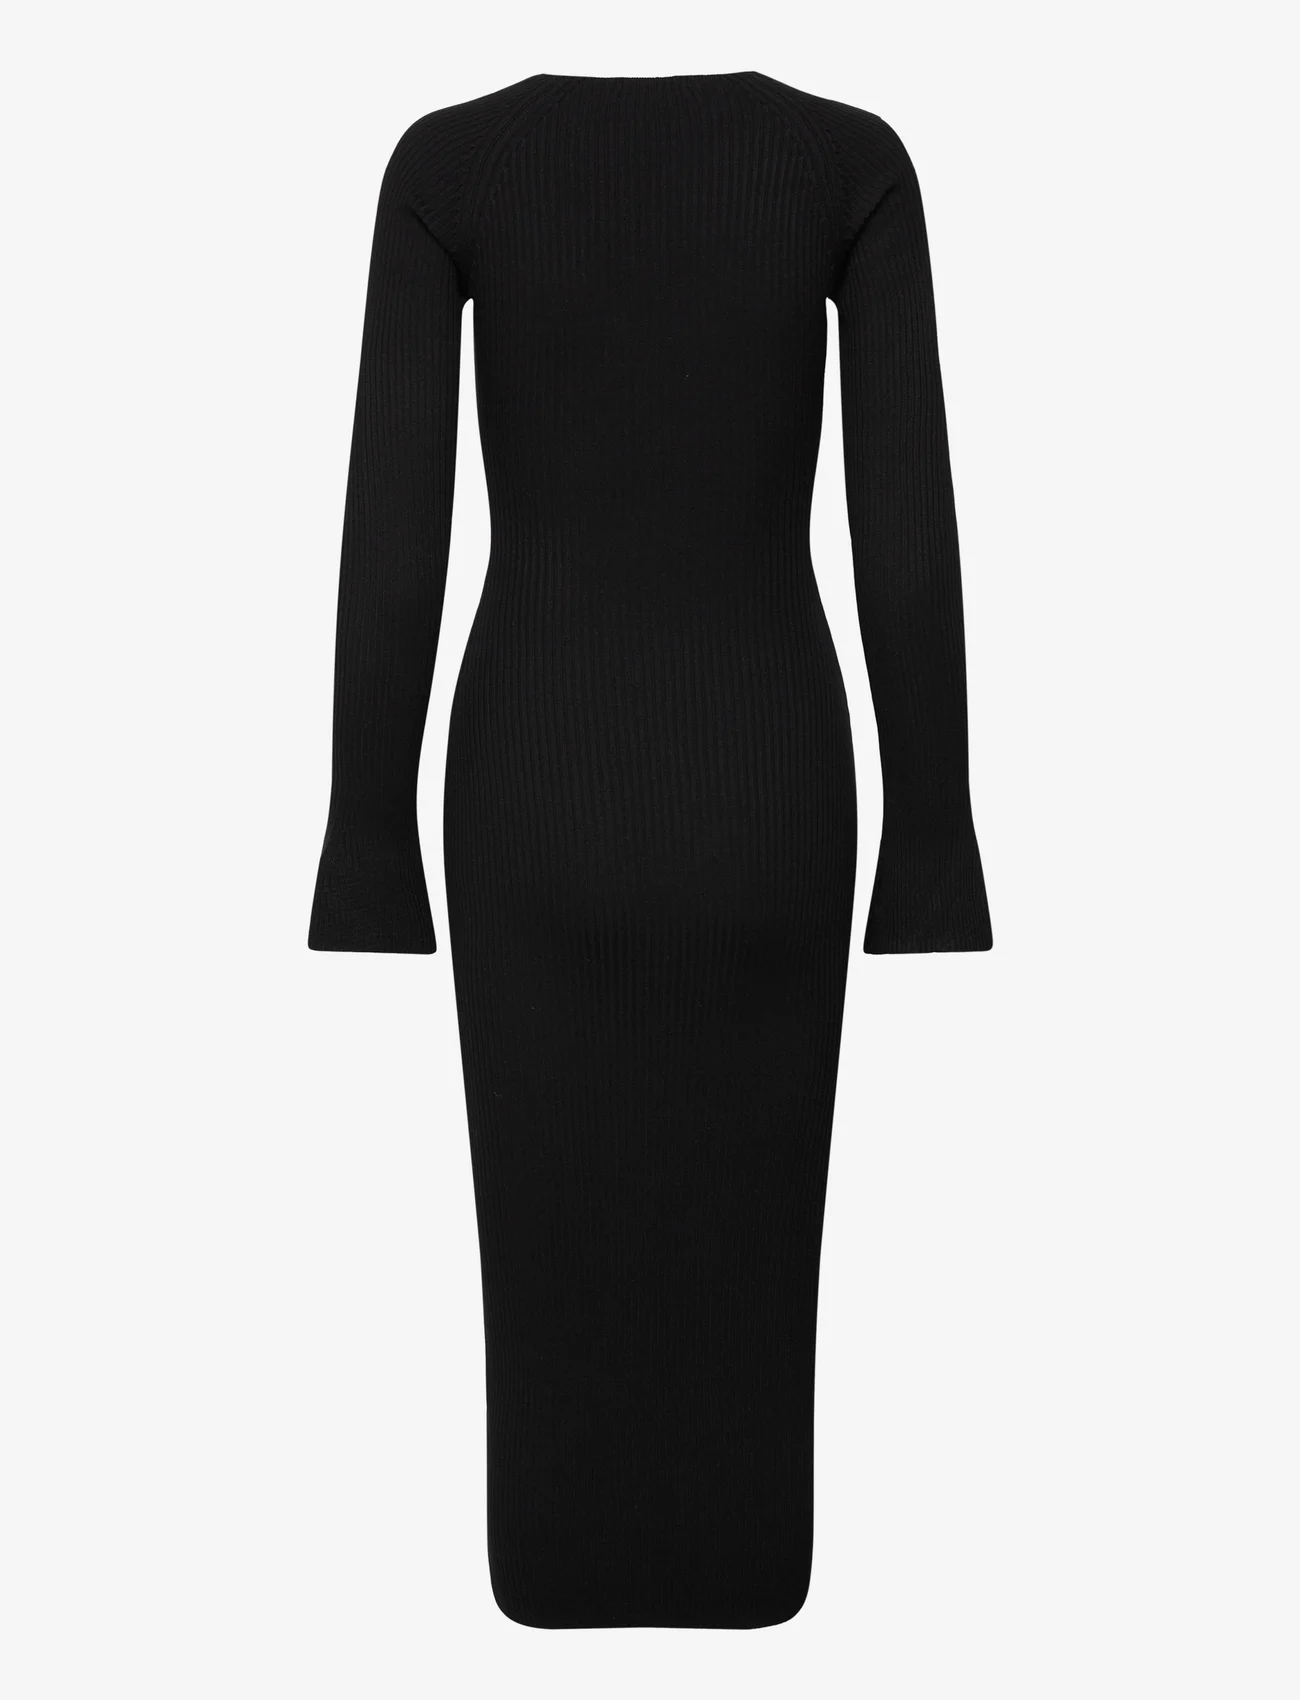 Gina Tricot - Contrast knitted dress - robes moulantes - black (9000) - 1